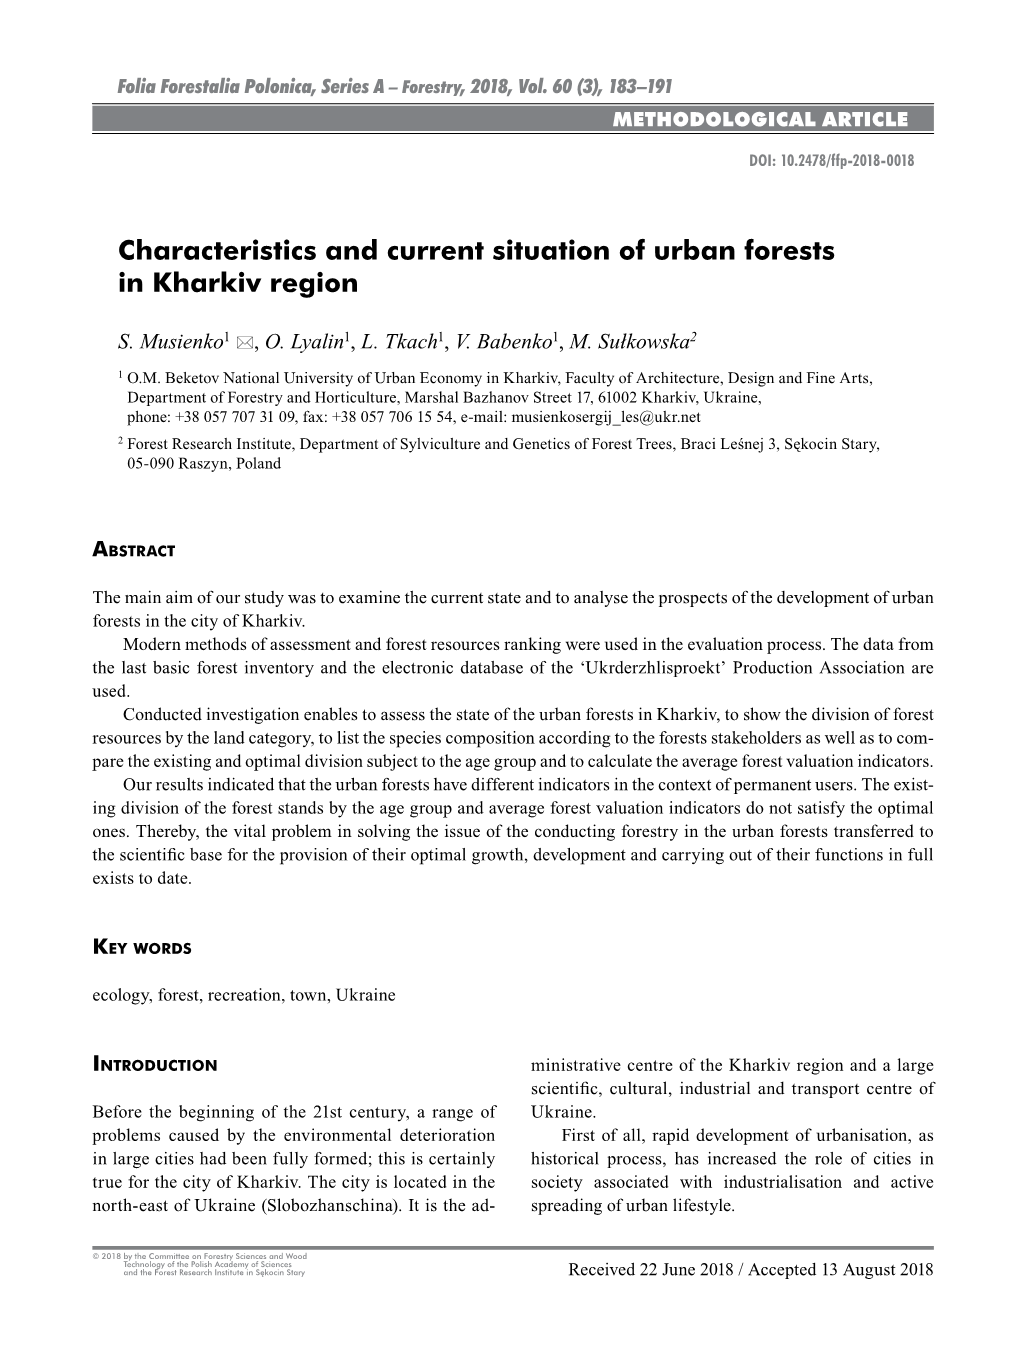 Characteristics and Current Situation of Urban Forests in Kharkiv Region